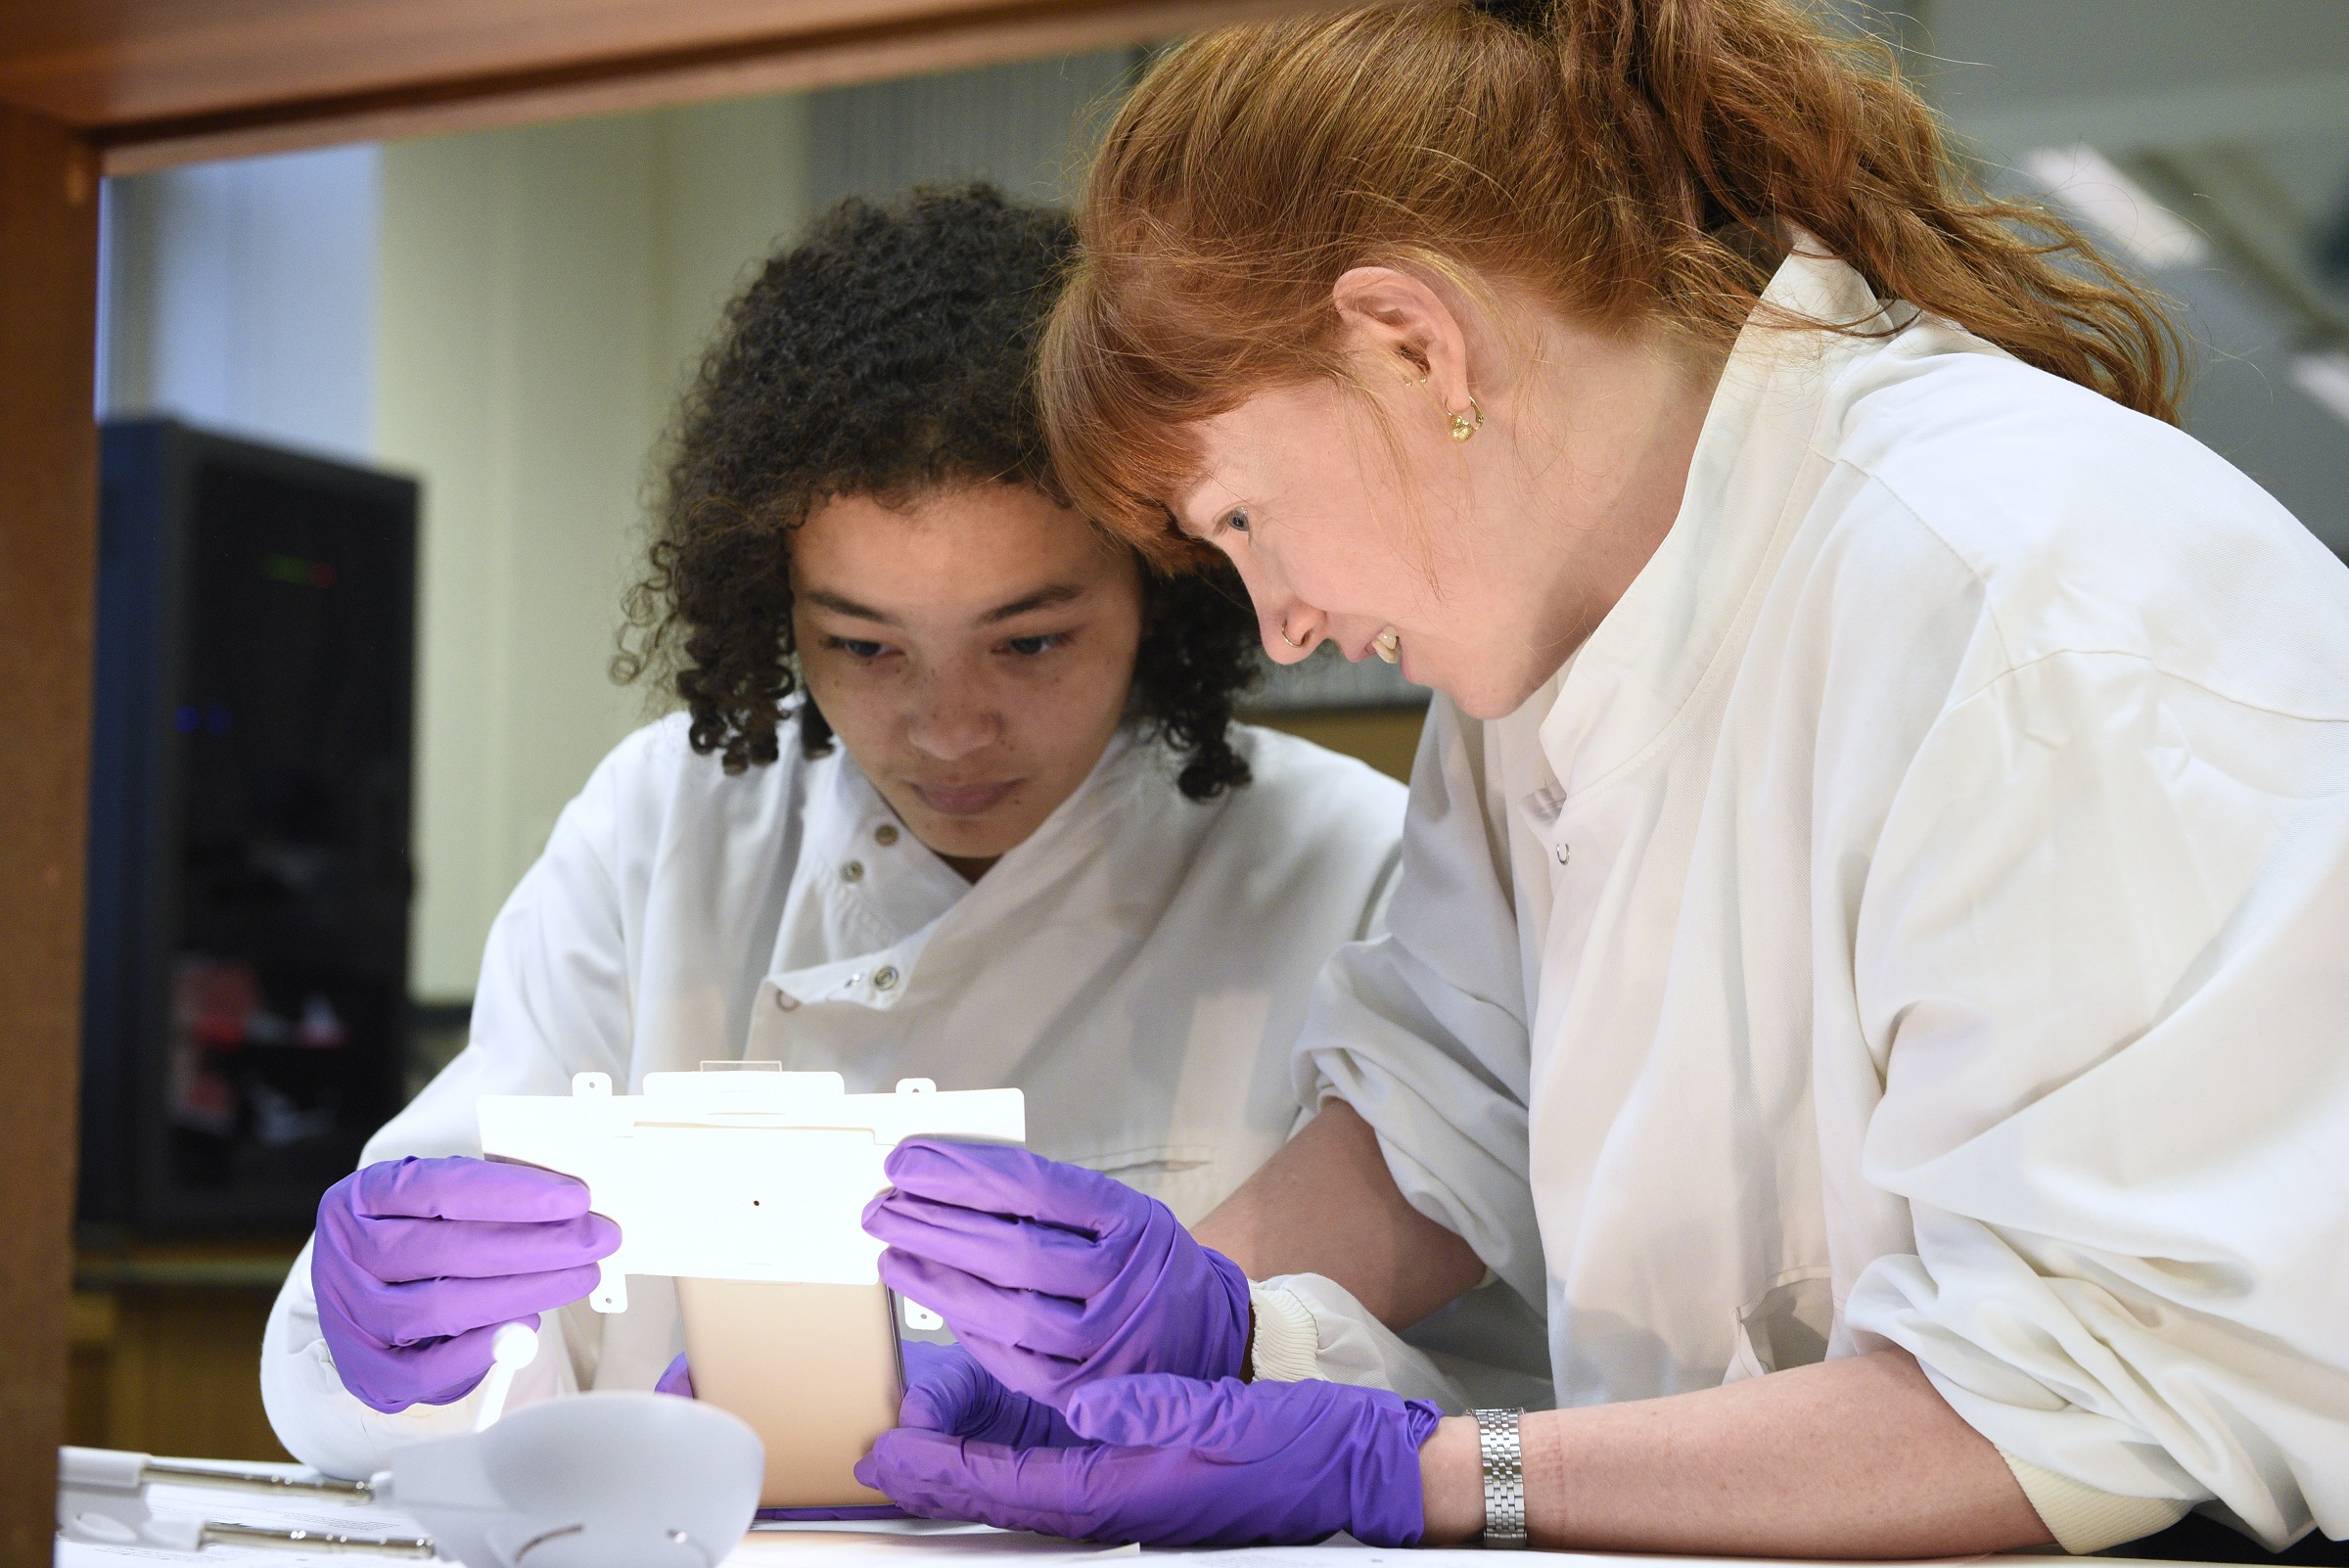 LSHTM researcher and a visiting pupil using a paper microscope to look at samples